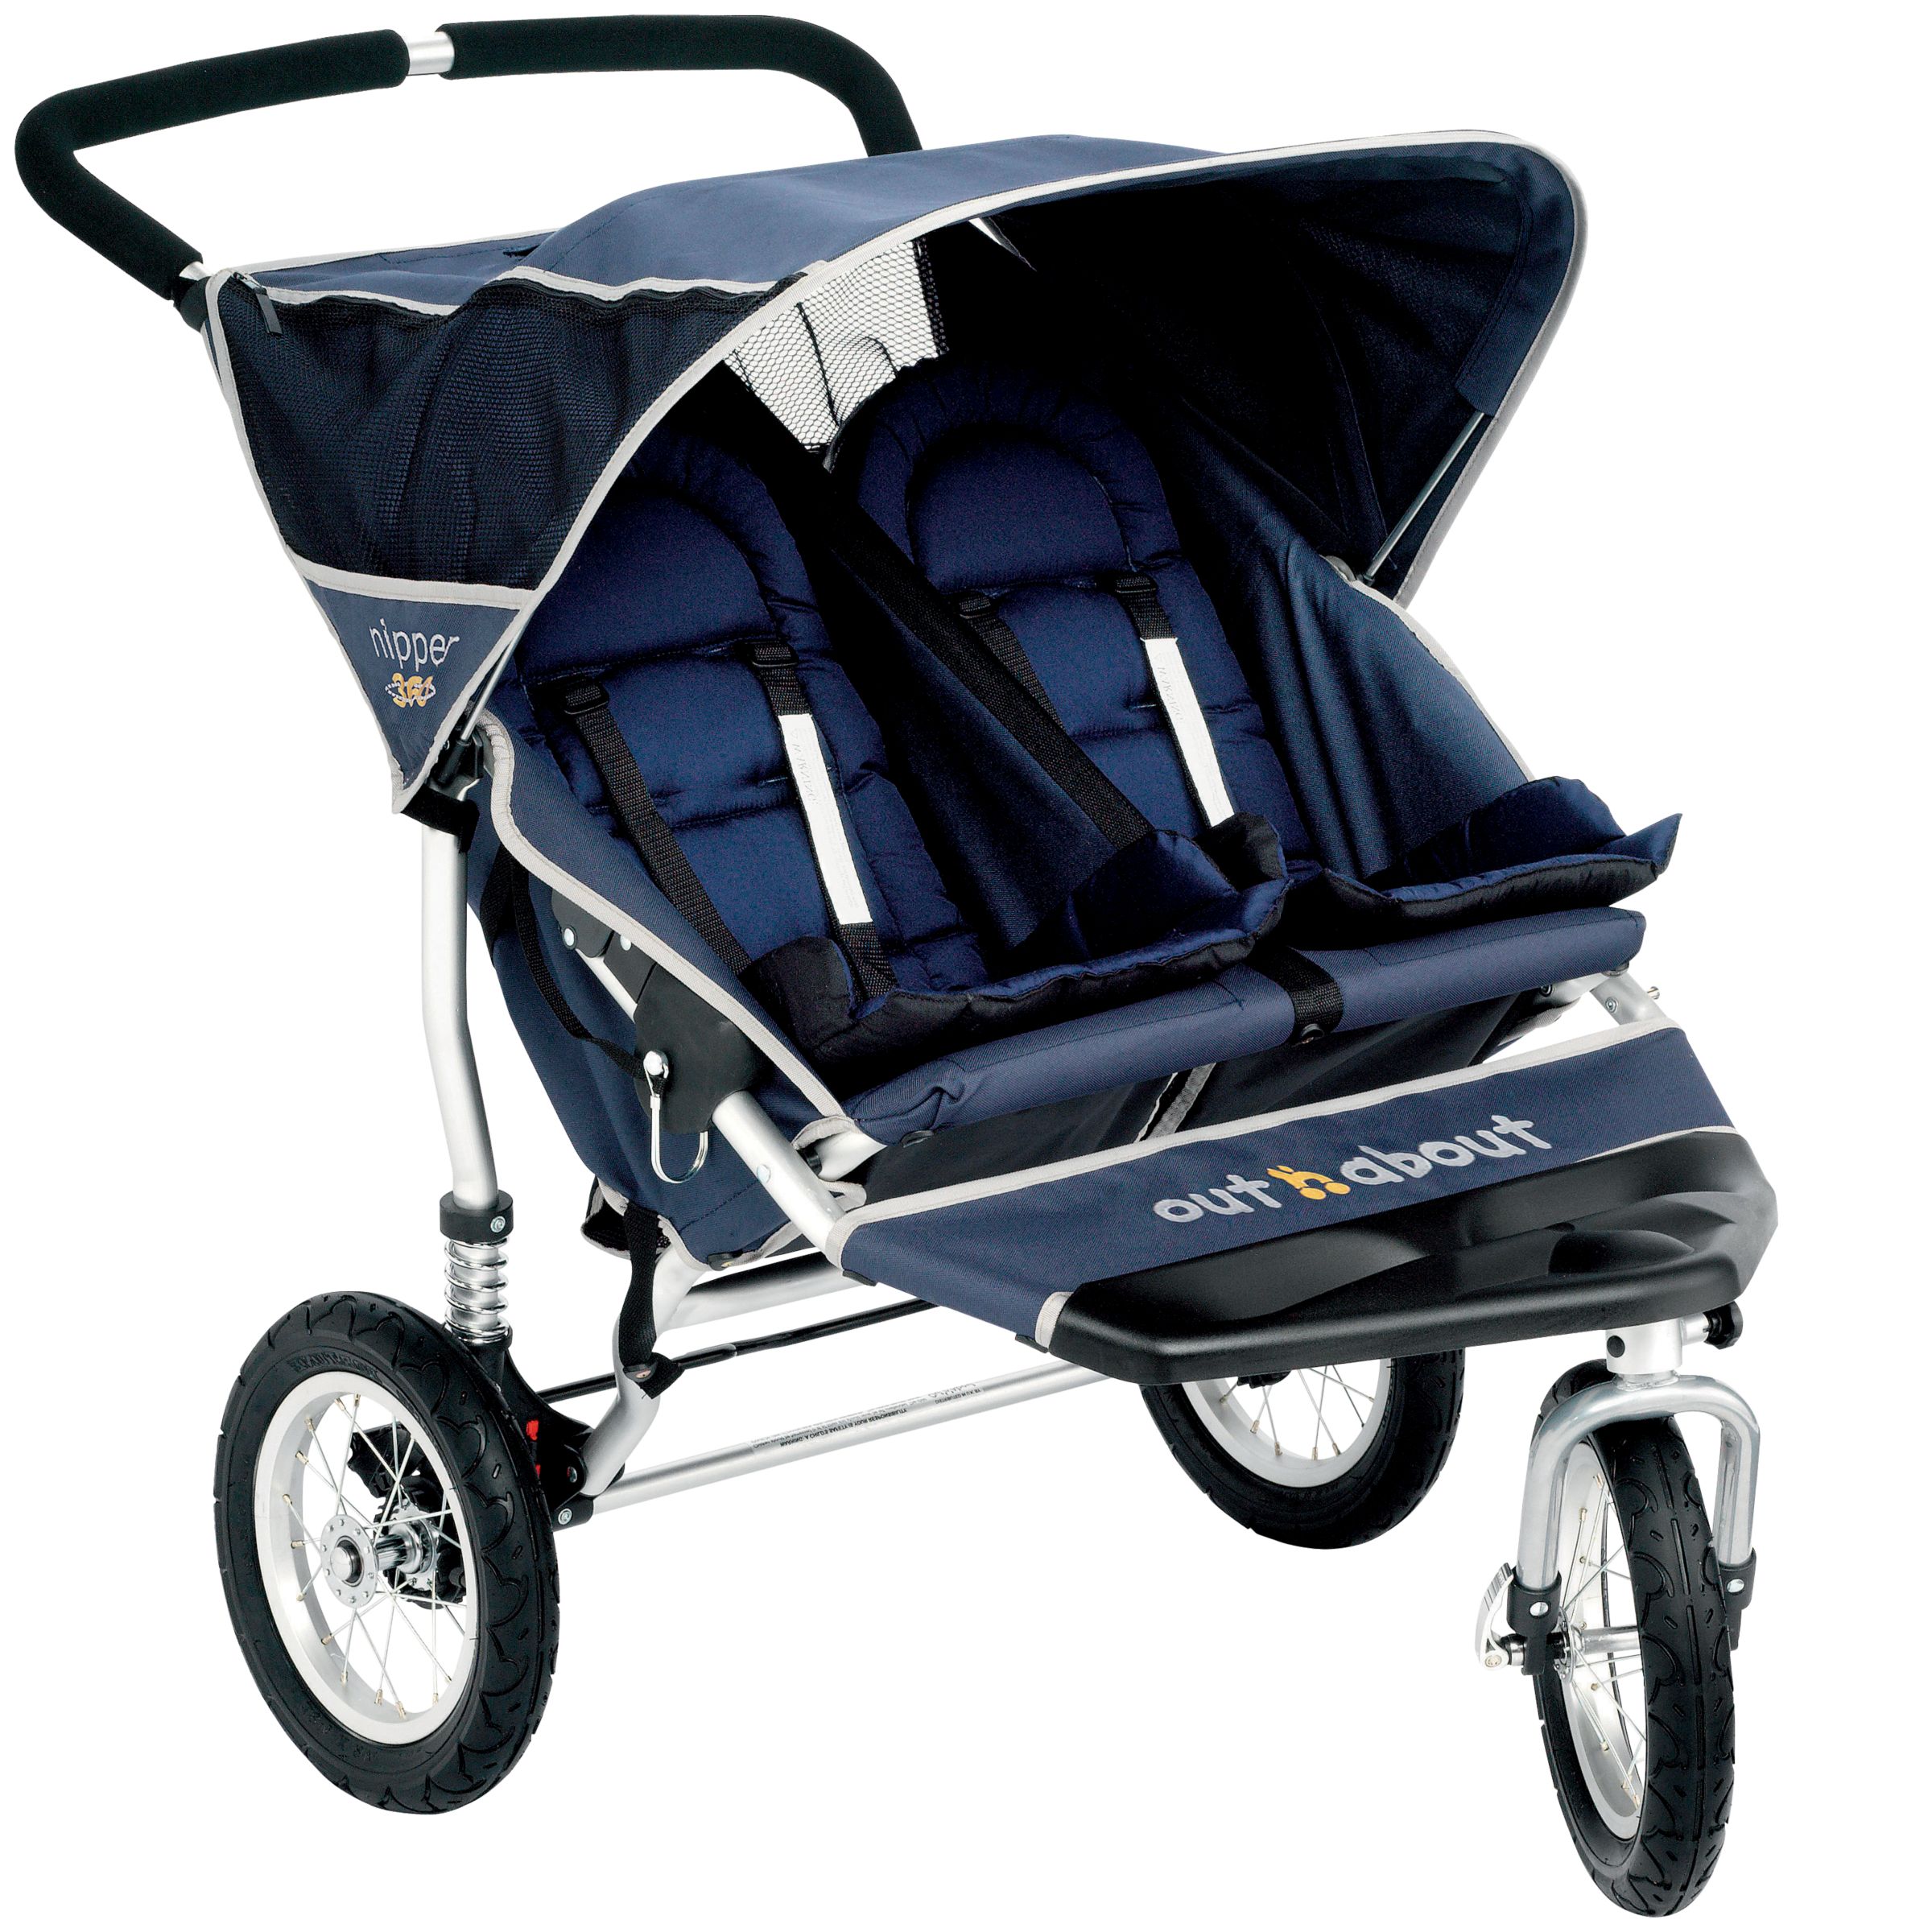 Out 'N' About Nipper Double Pushchair 360, Blue at John Lewis